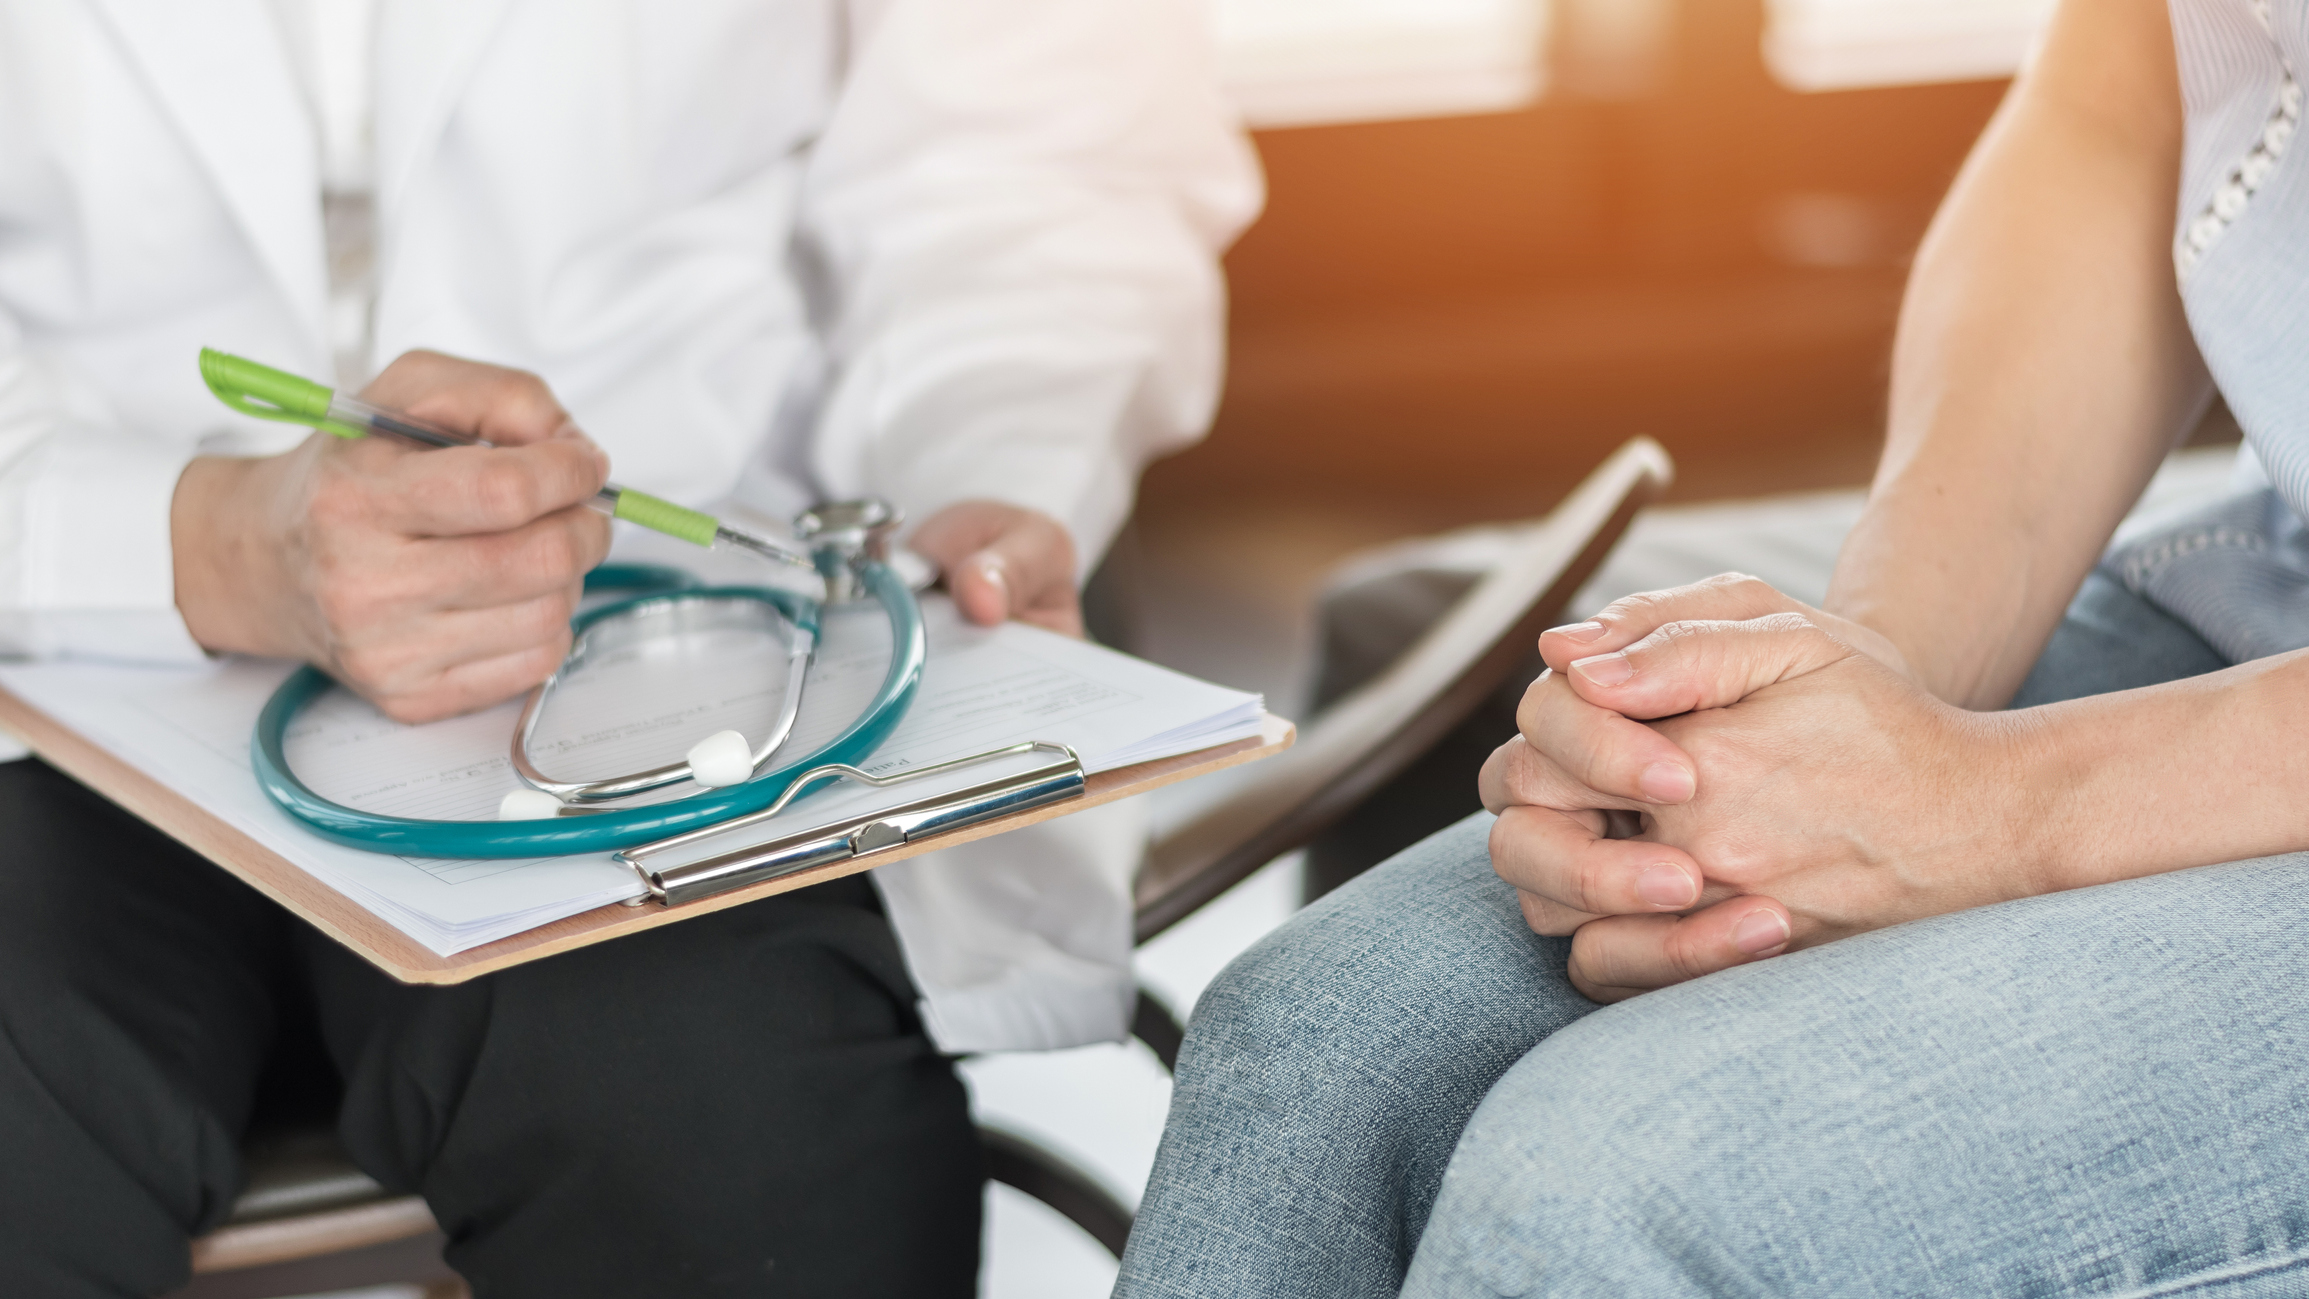 Picture of two people's hands. One is holding a clipboard with a stethoscope sitting on it. The other appears to be a patient with their hands clasped in their lap